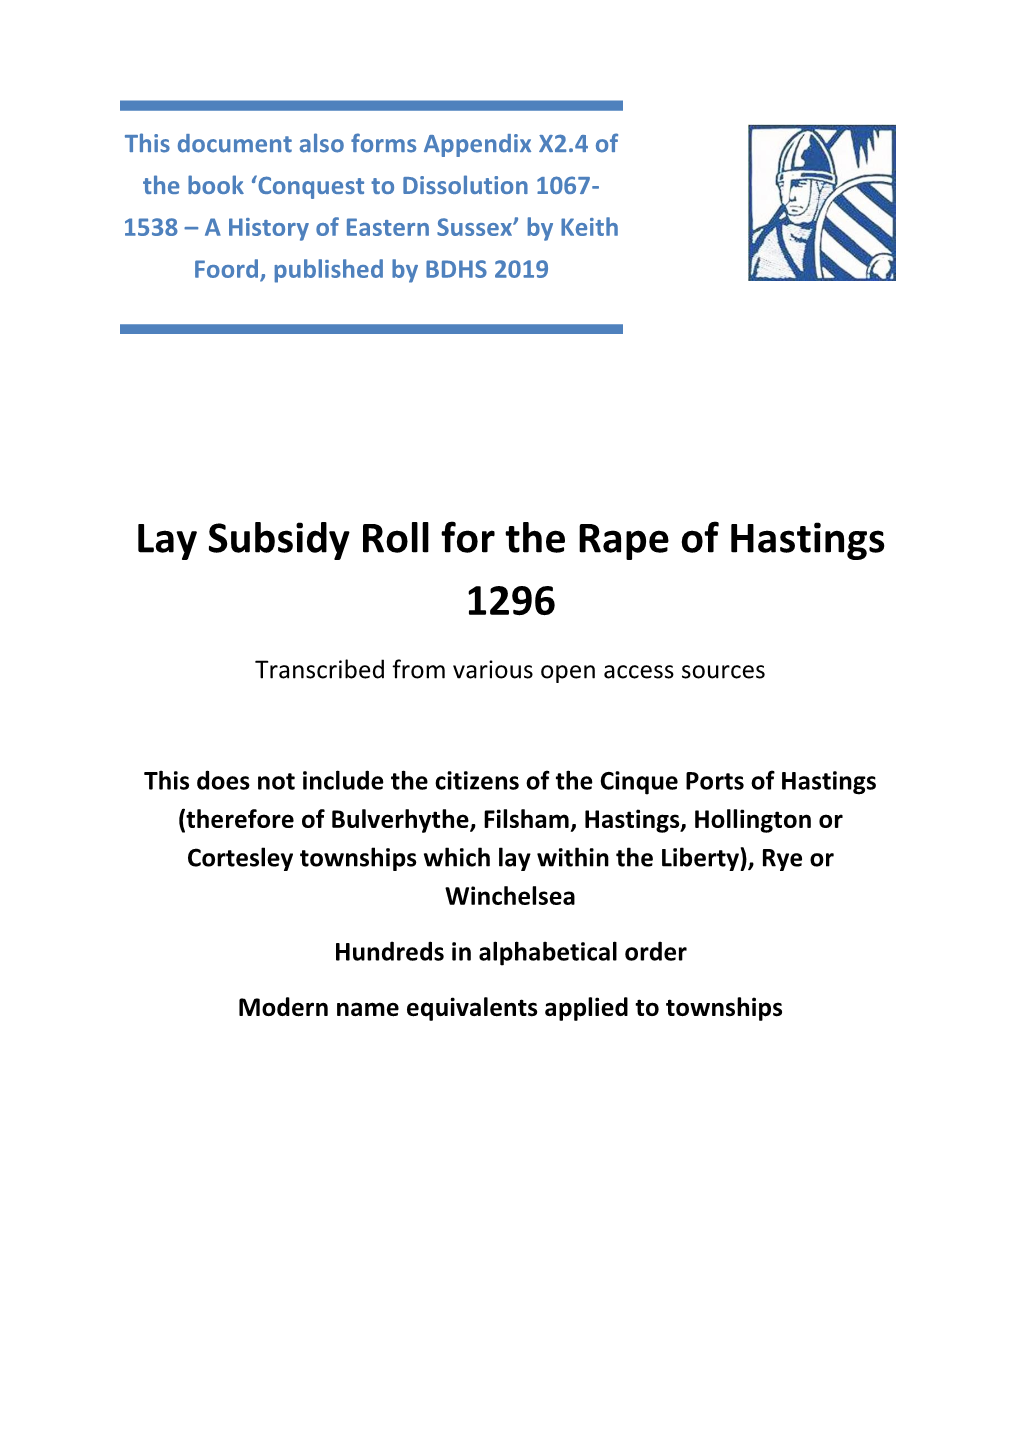 Lay Subsidy Roll for the Rape of Hastings 1296